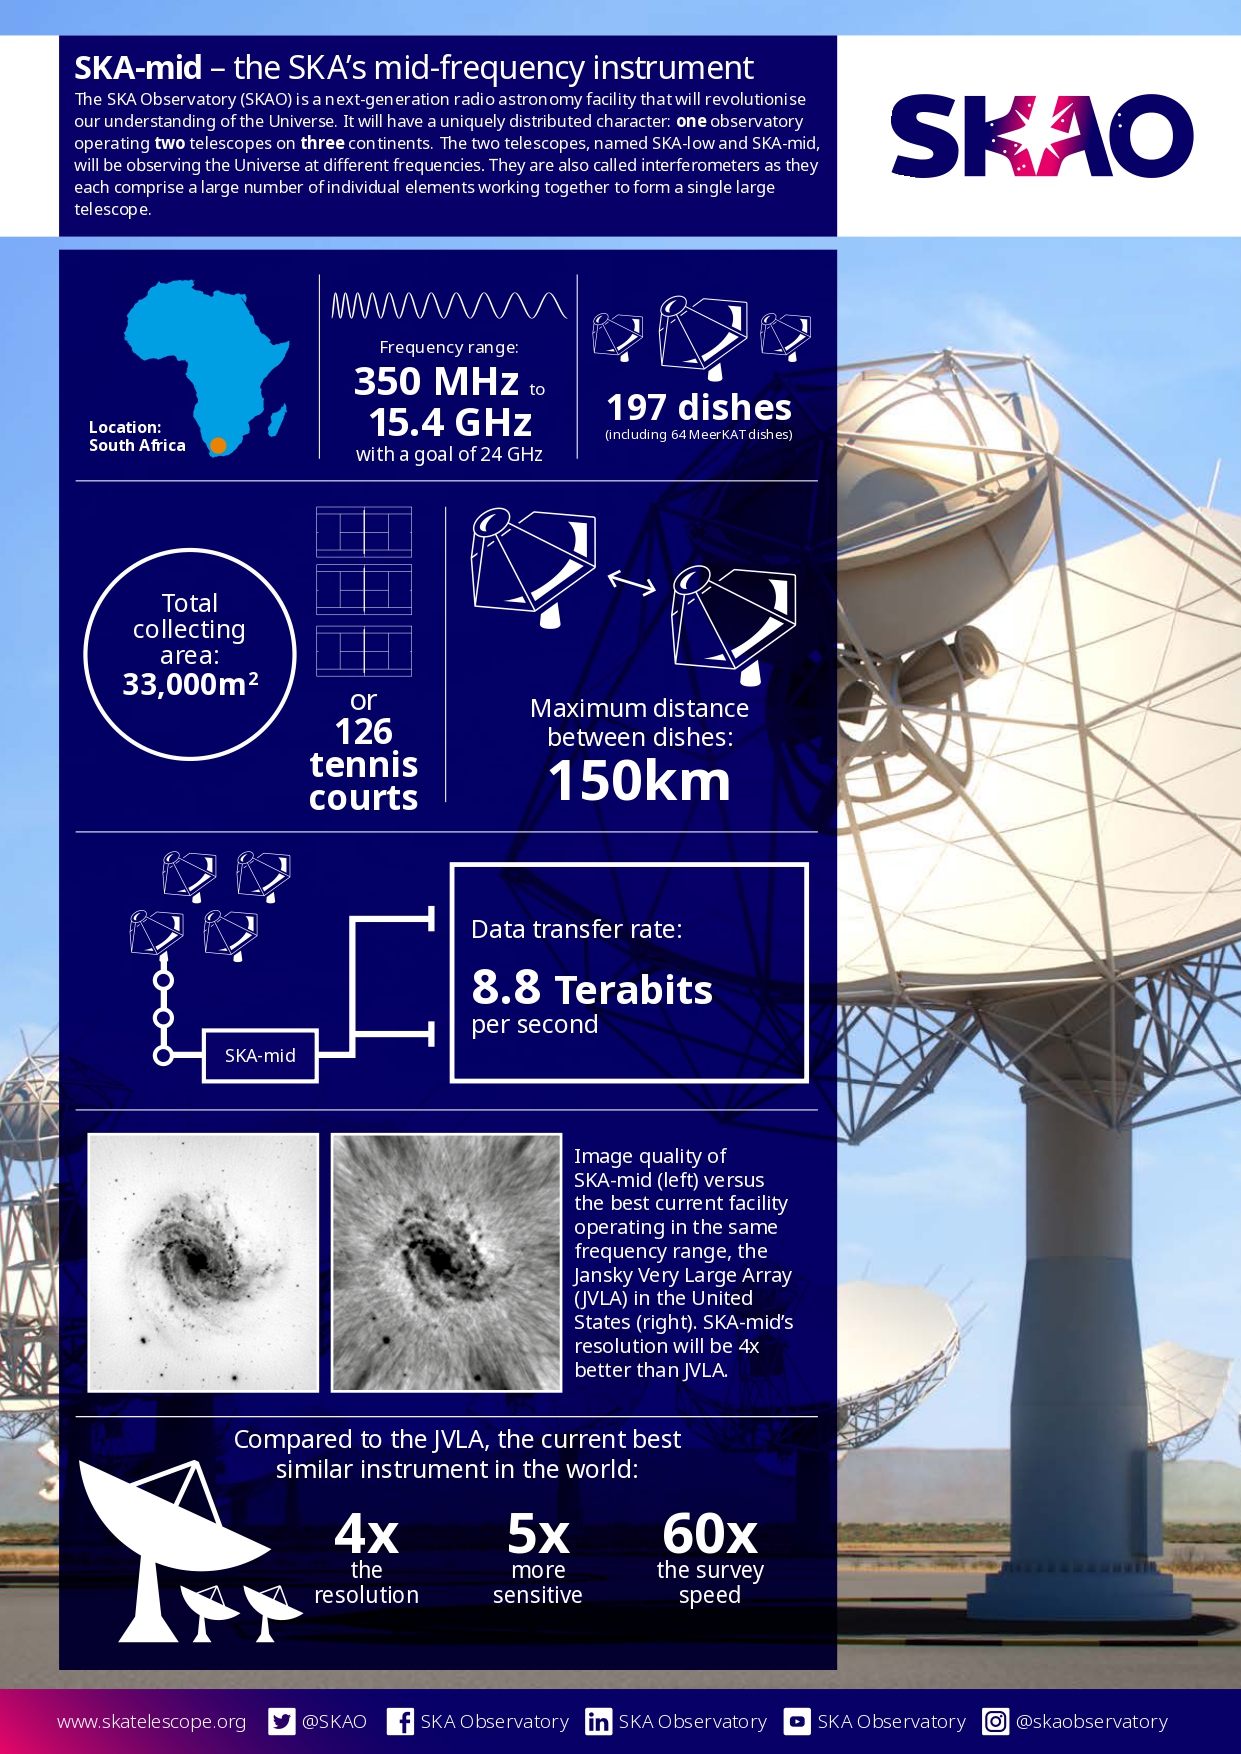 Infographic displaying the SKA-mid, the SKA's mid-frequency instrument located in South Africa.